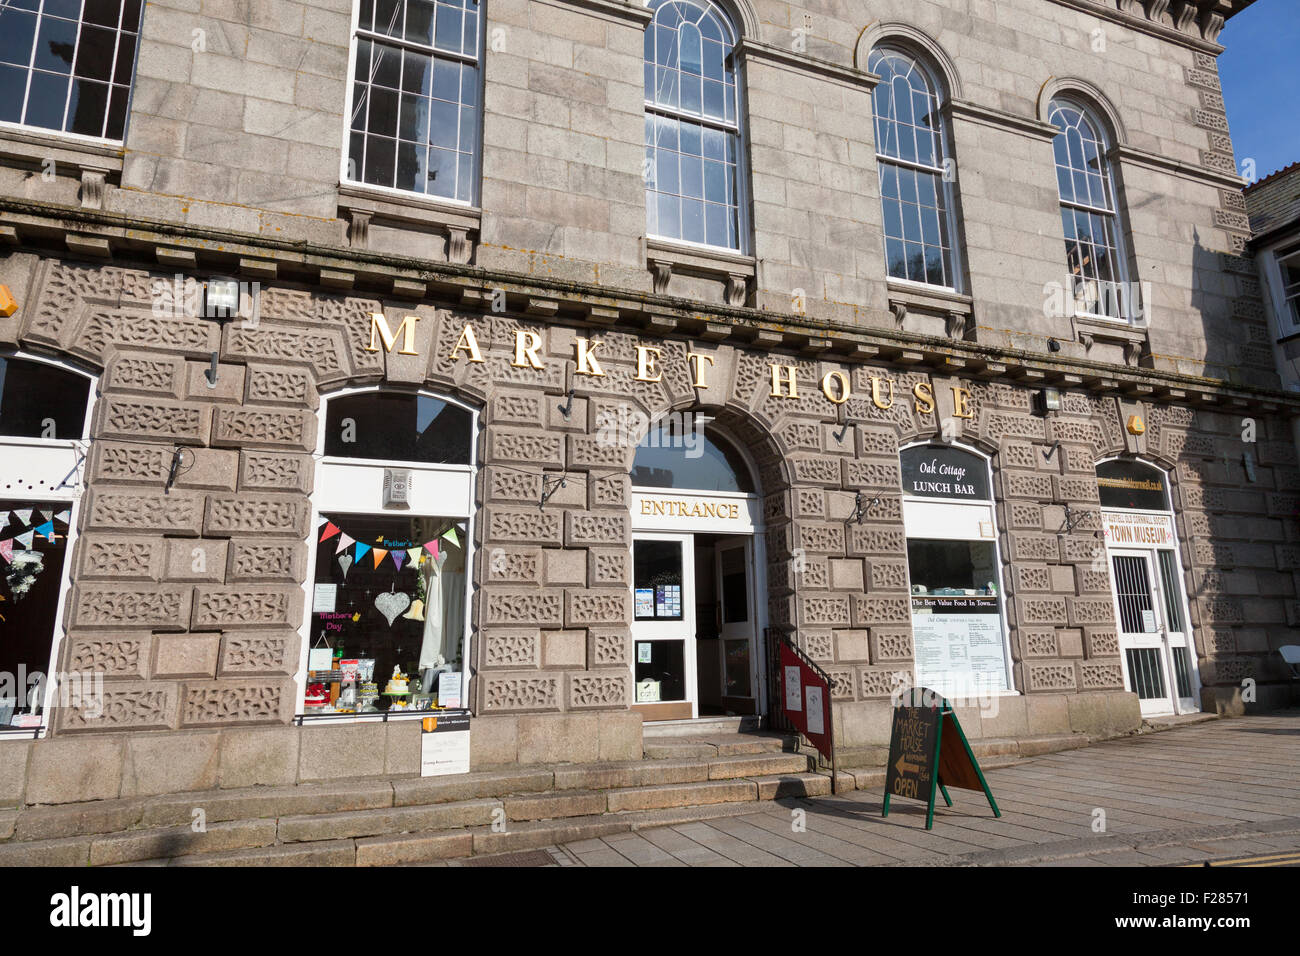 The Market House in St Austell, Cornwall, England, U.K. Stock Photo